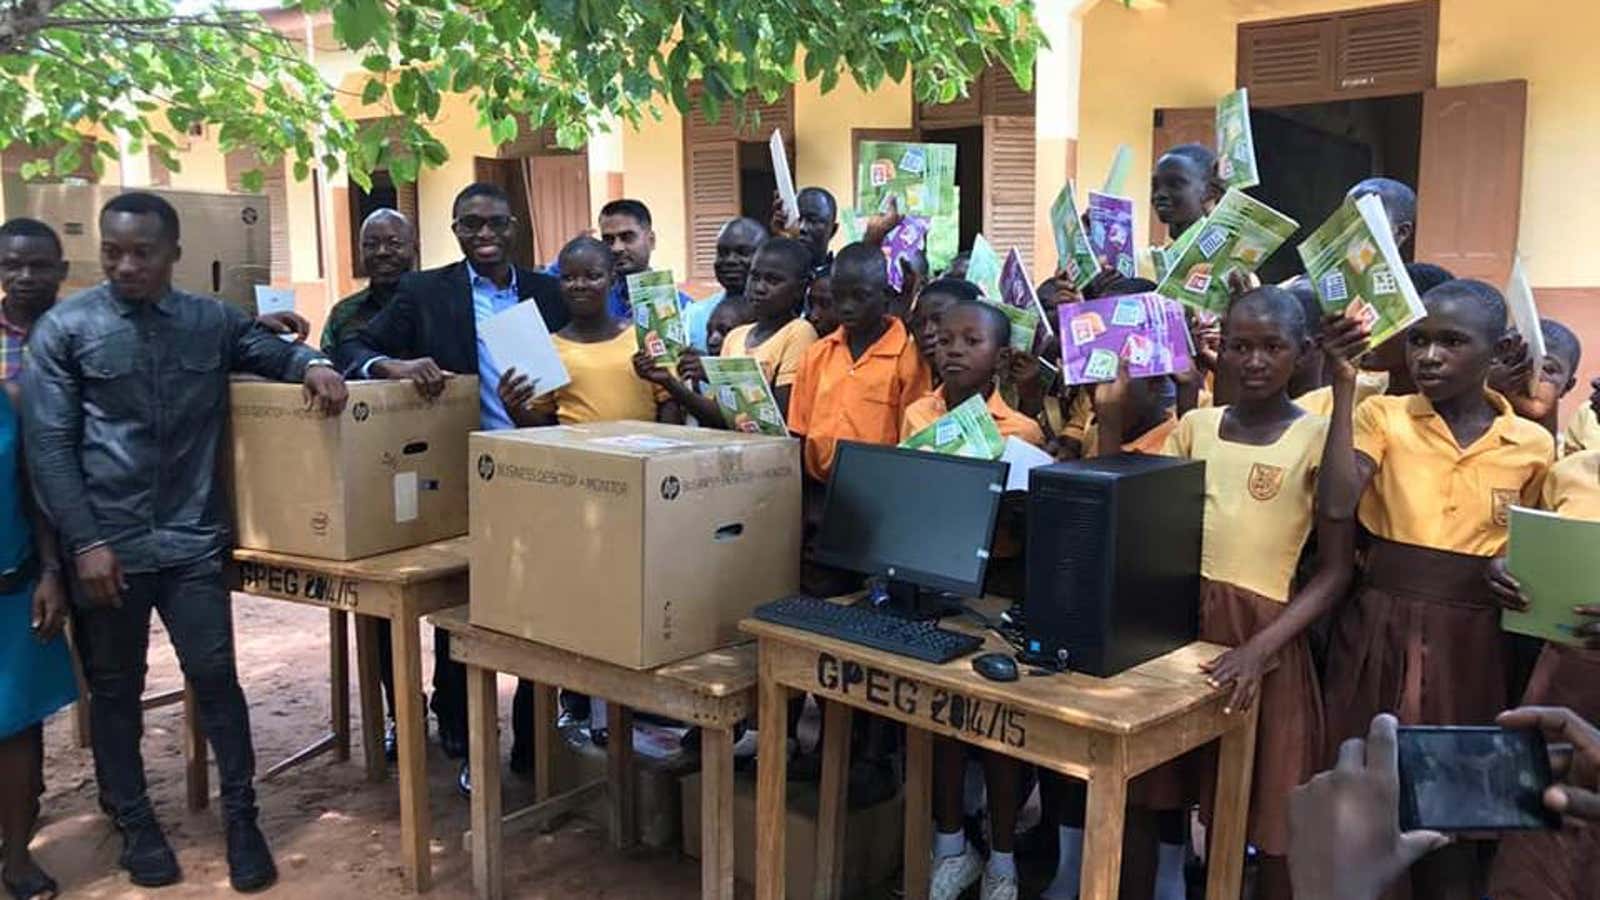 The students receive gifts of five computers.